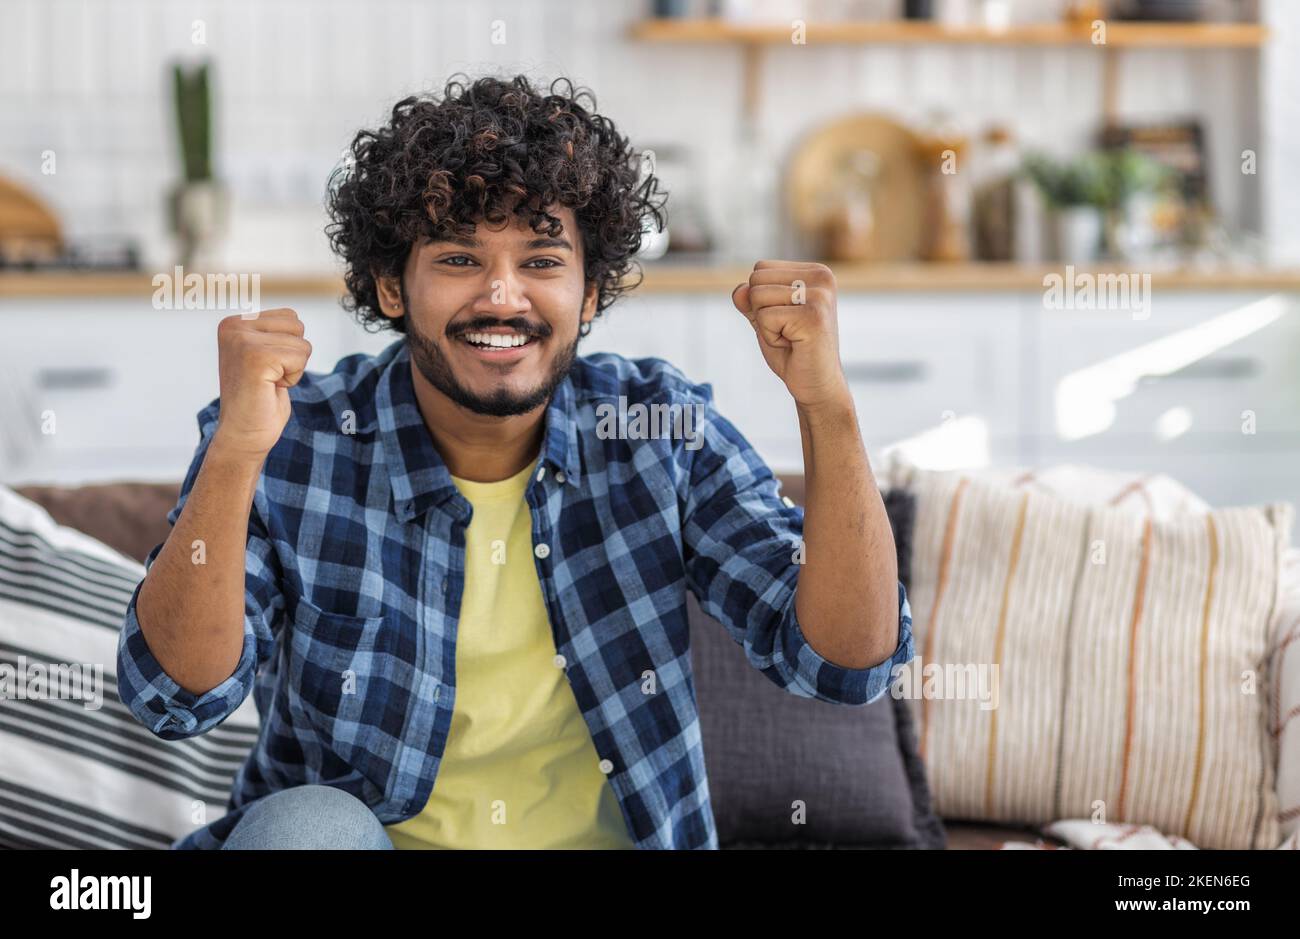 Smiling male with curly hair showing yes gesture, sitting on couch at home. Good news concept Stock Photo